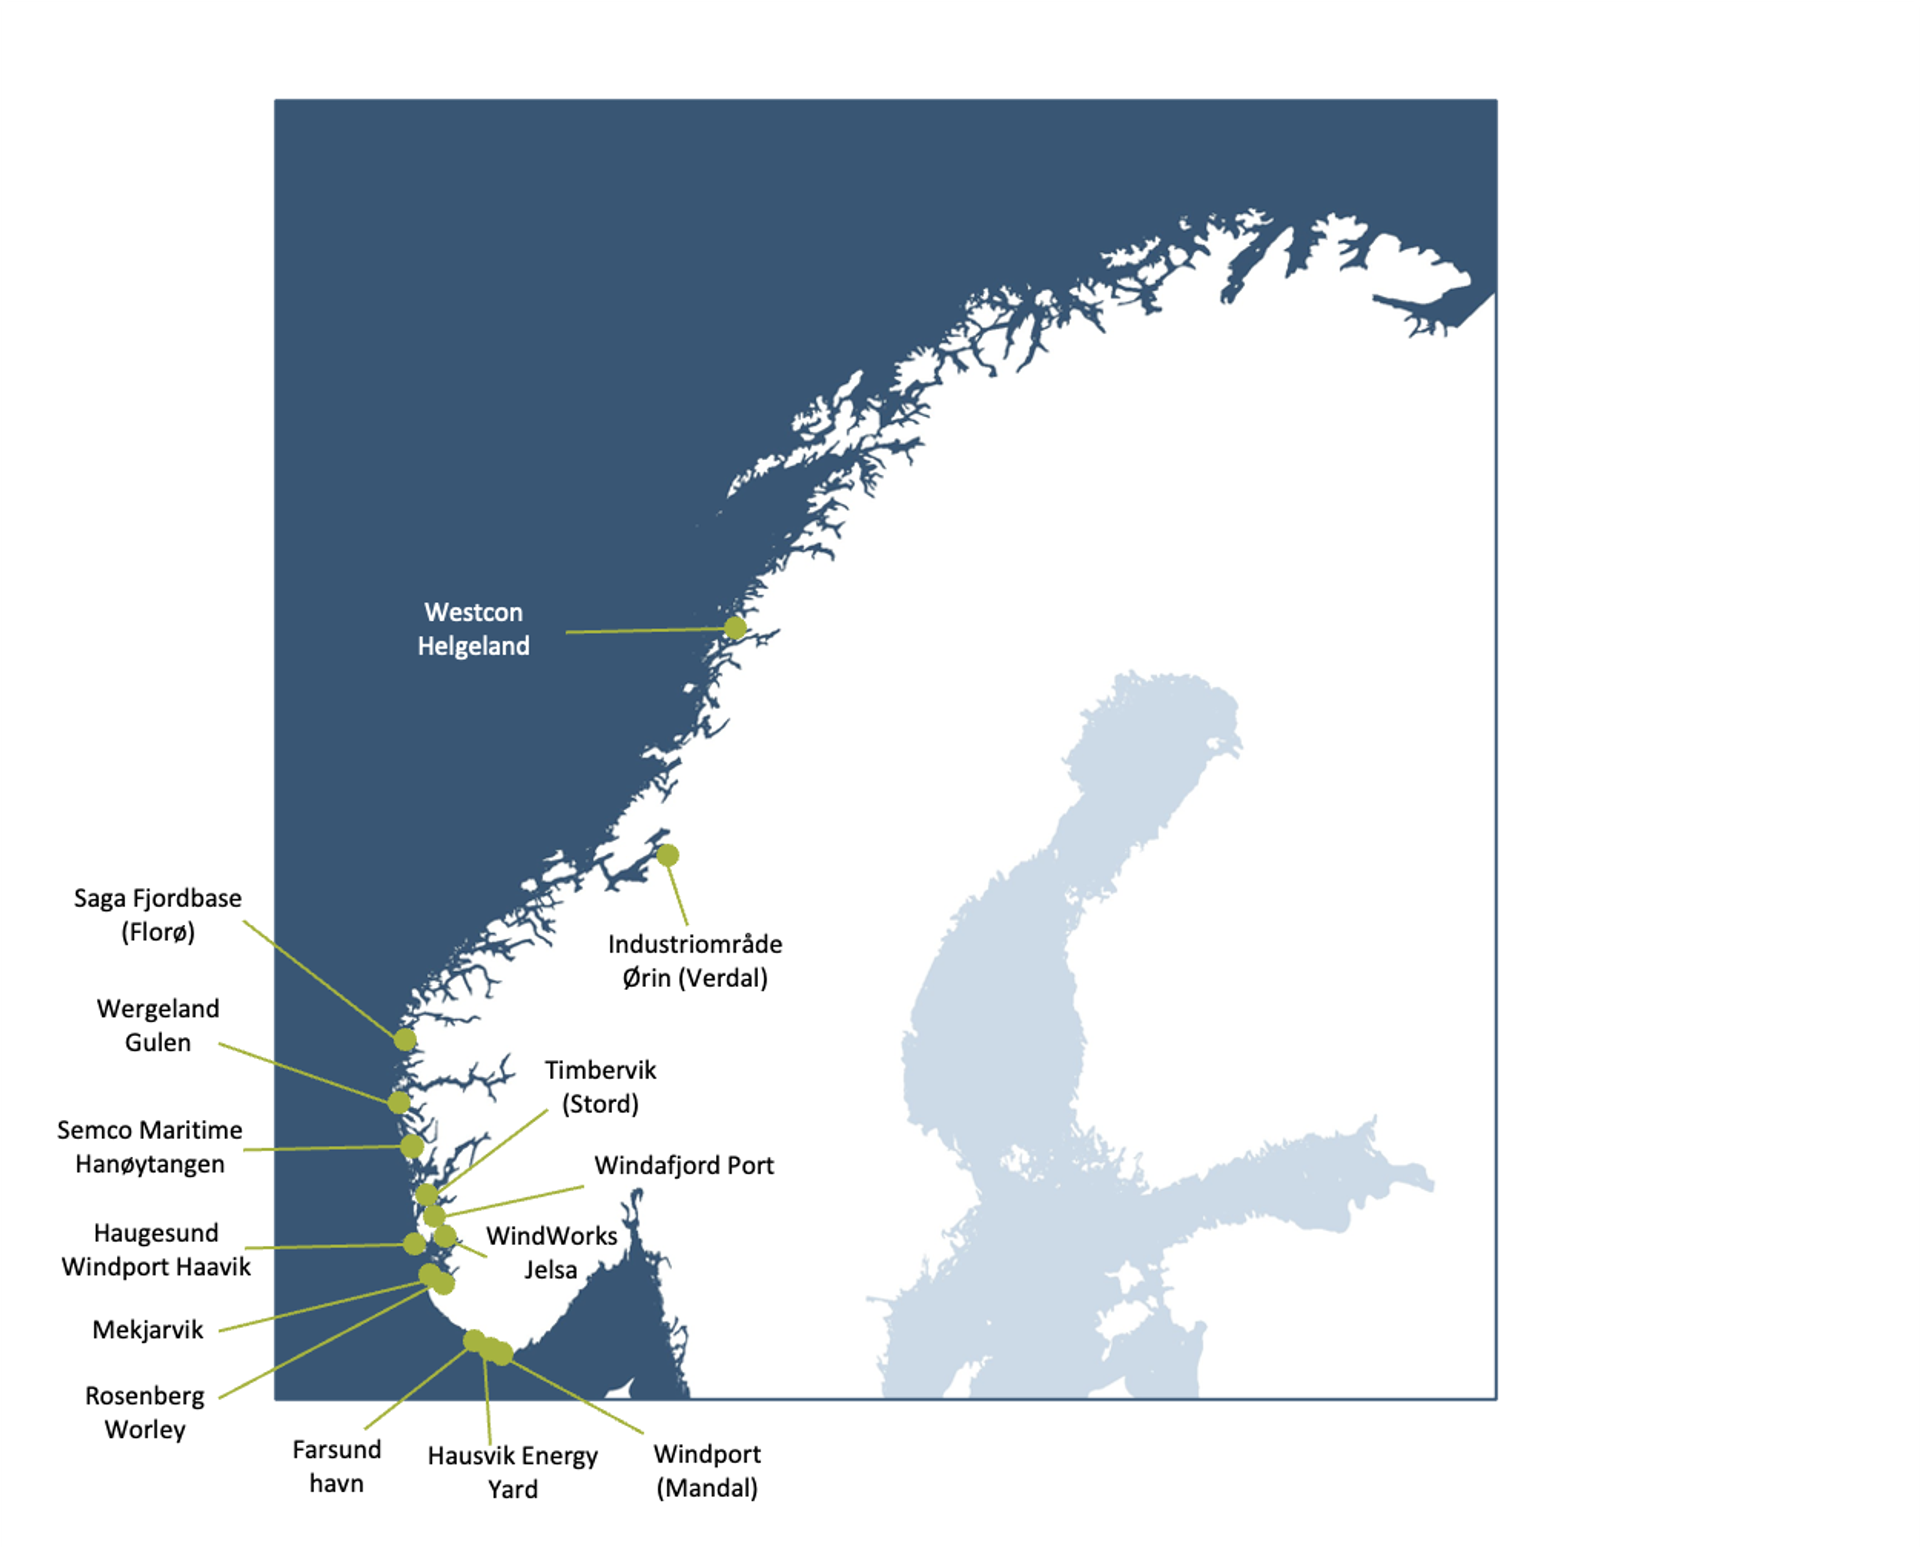 Map from Menon Economics of the offshore wind ports in Norway